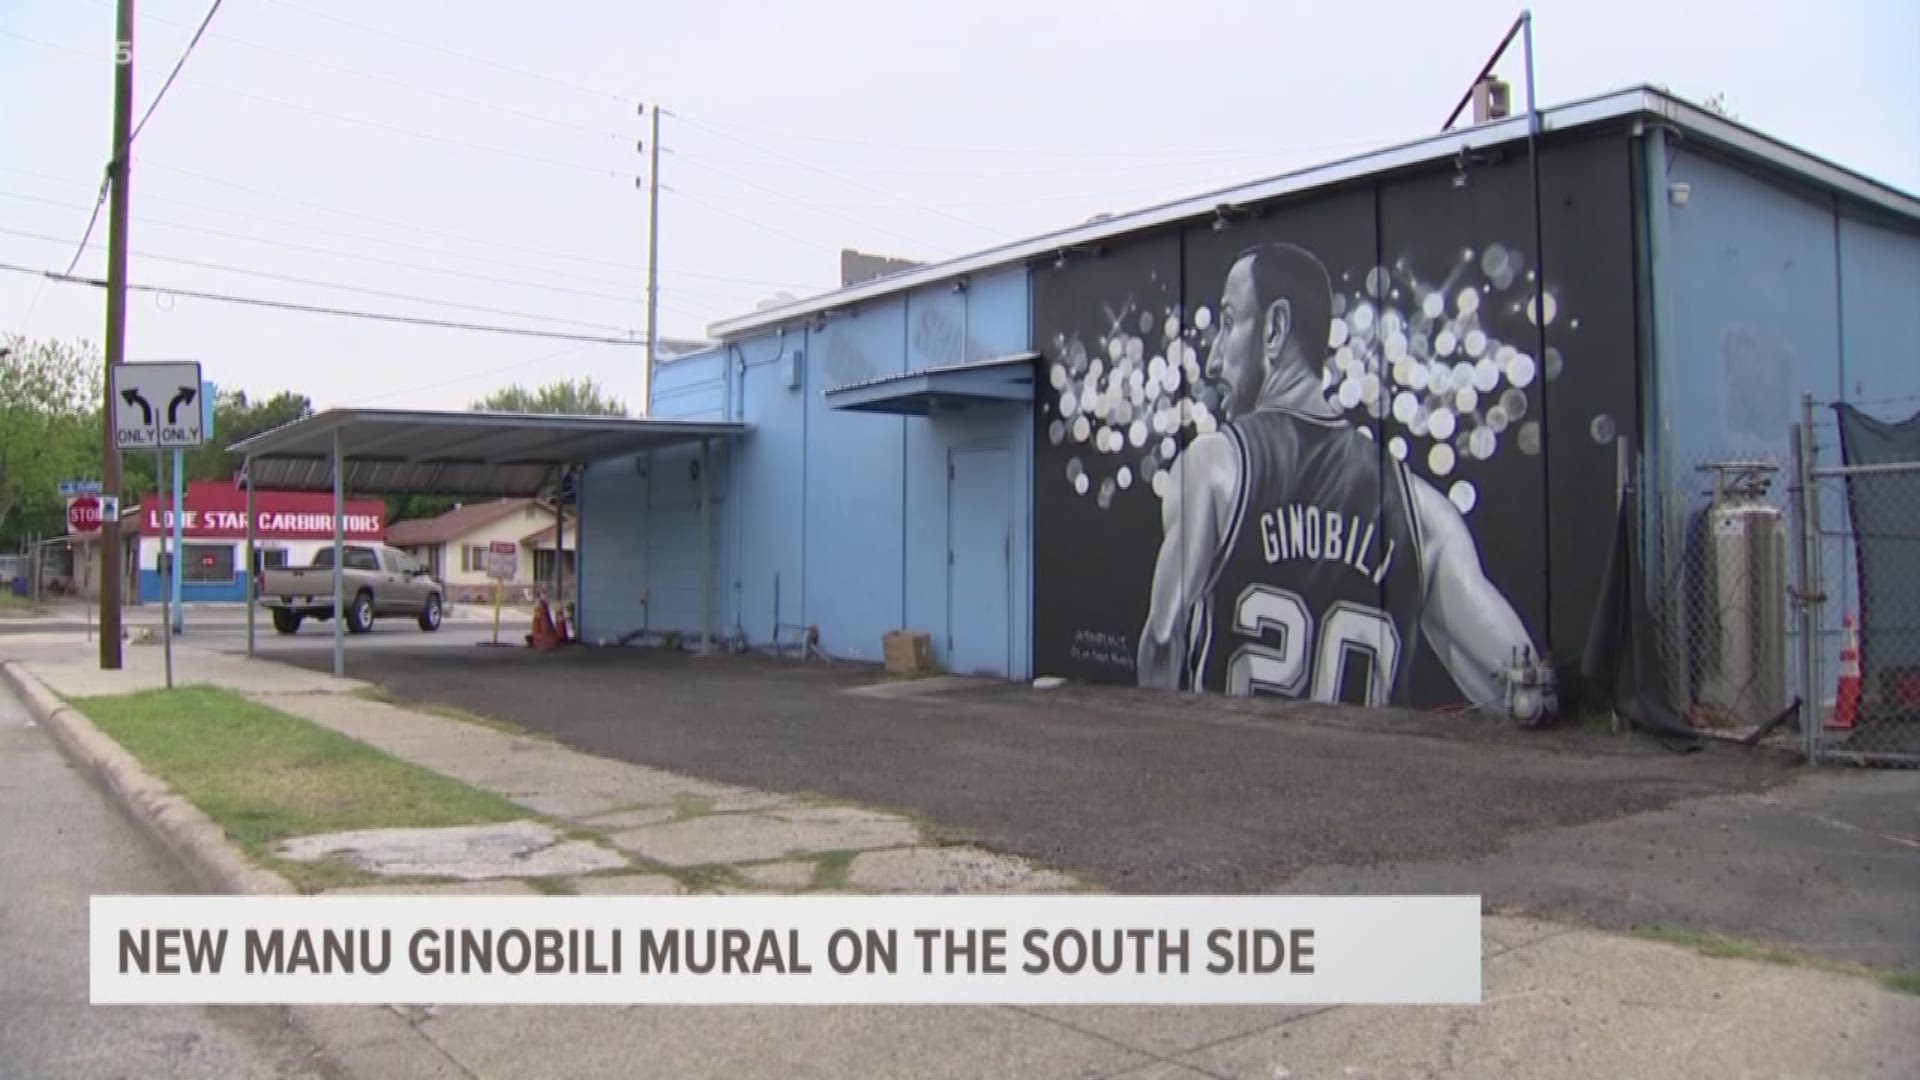 A Spurs Manu Ginobili mural was unveiled at Rudy's Seafood restaurant on the south side.